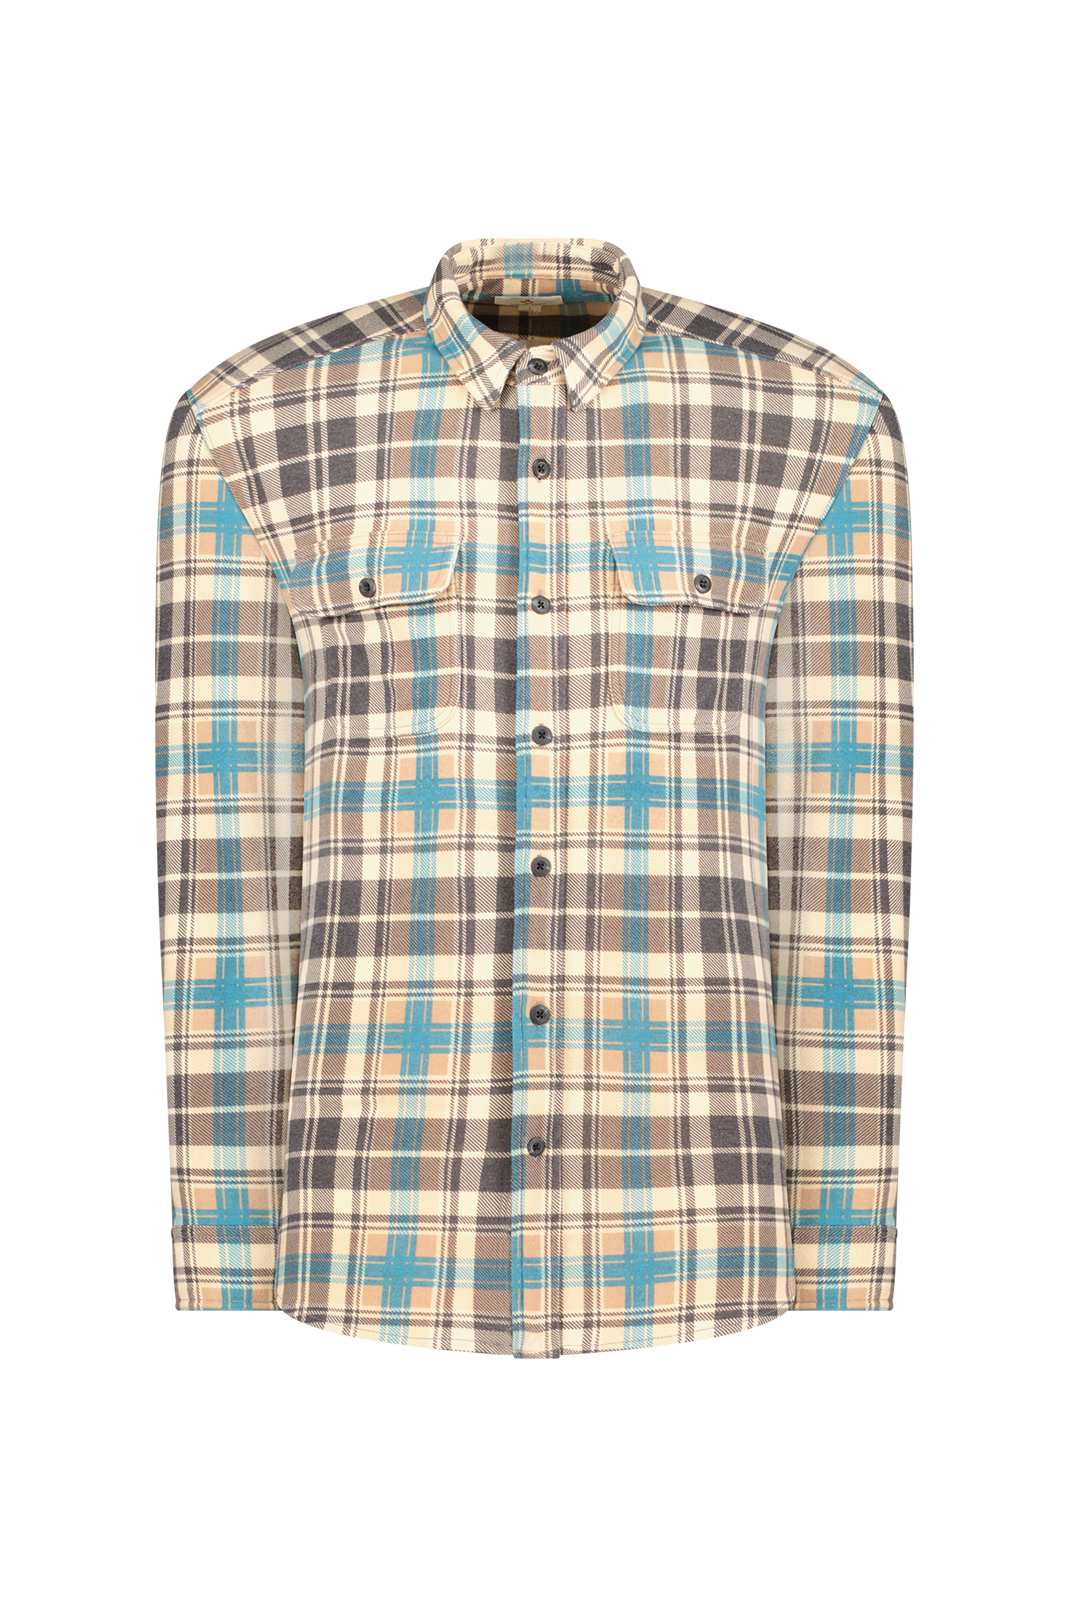 LONG SLEEVE 2 POCKET SHIRT - TURQUOISE/NATURAL - Kingfisher Road - Online Boutique